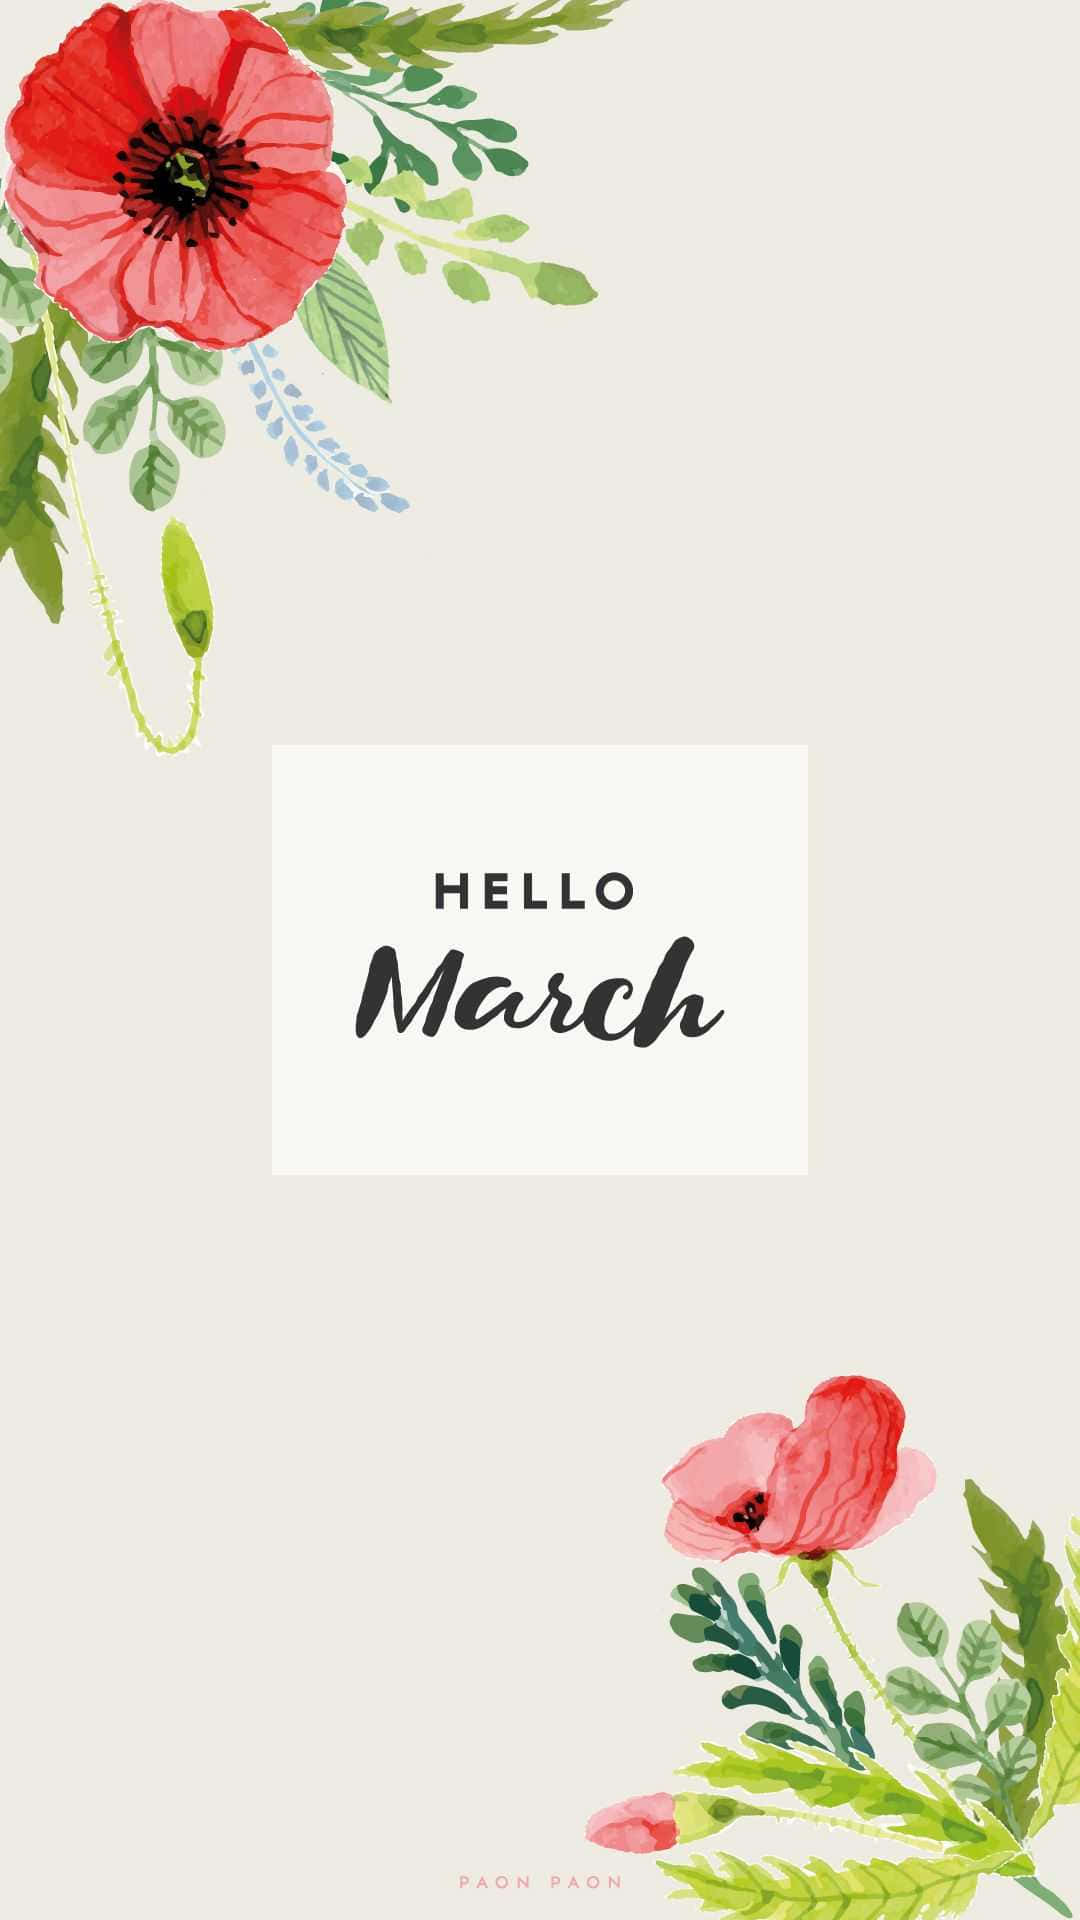 Hello March Red Flowers Border Wallpaper